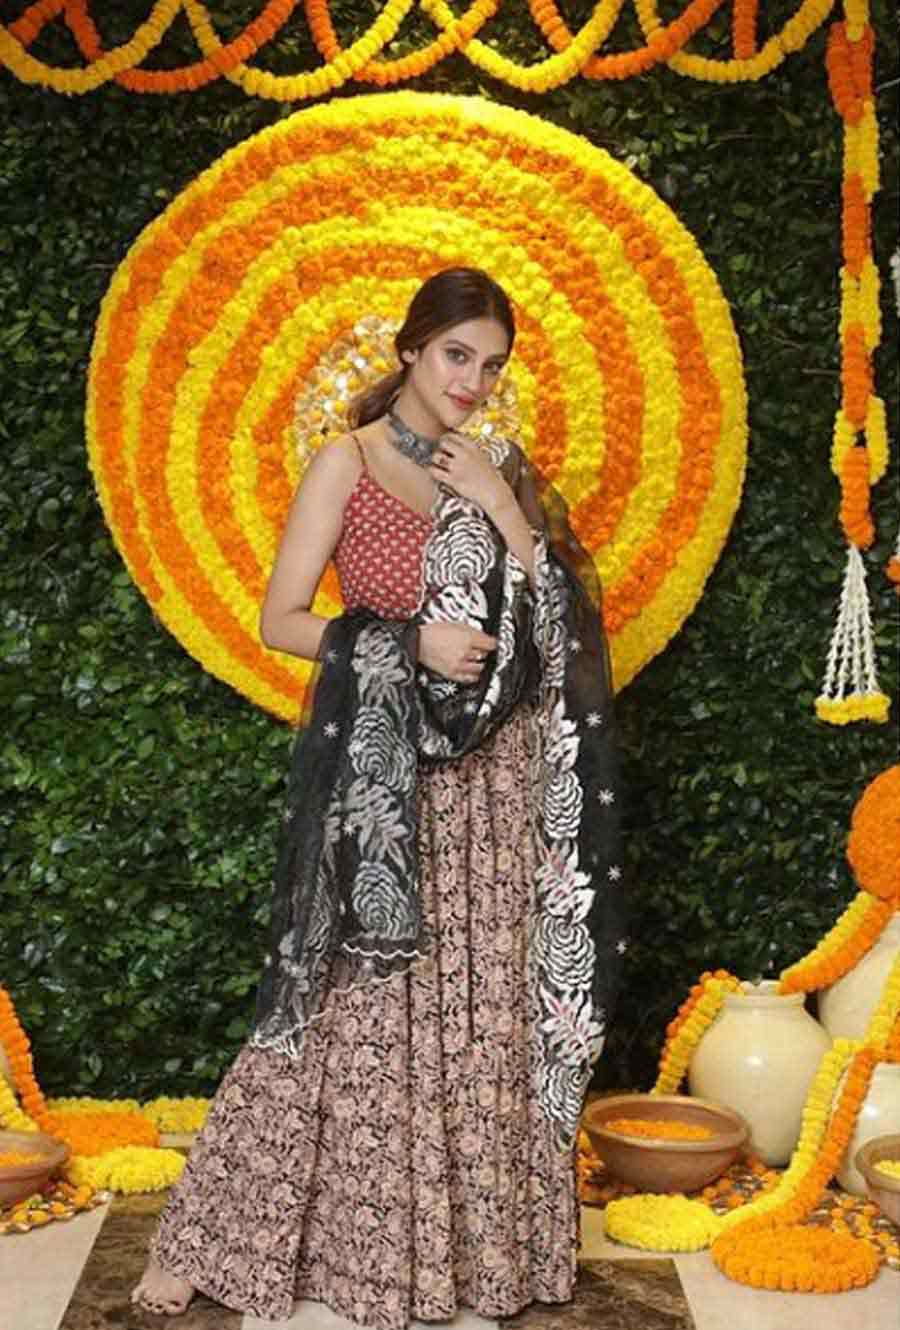 RETURN TO SPOTLIGHT: Actor turned politician Nusrat Jahan posted this photograph on Instagram on Thursday, September 30 and wrote: “Many problems and obstacles have knocked on my door. However, I have faced all of them confidently with a positive outlook & overcome them in all my roles be it as an actor or as a public representative. I urge you all to also fight every evil you come across in life...” This week she reportedly returned to shooting after giving birth to her son recently